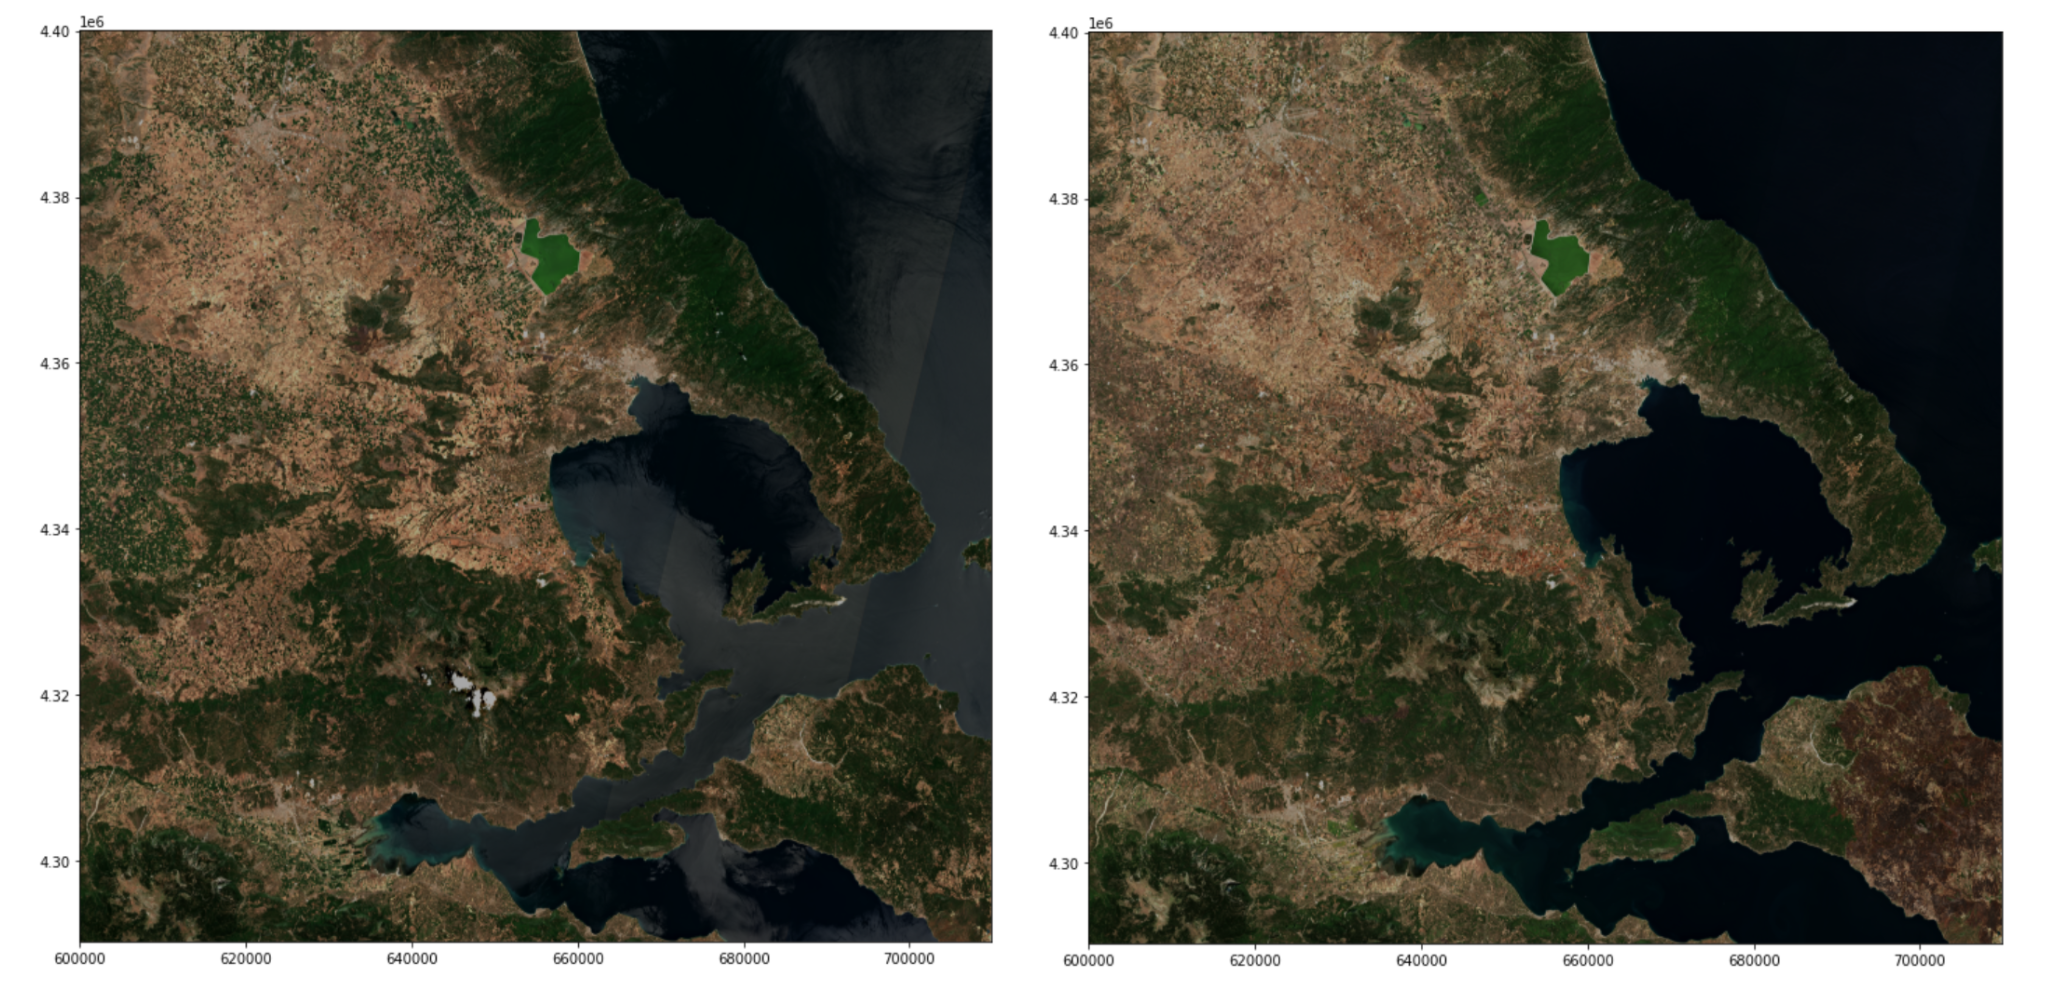 Figure 2. Natural colour composites from Sentinel-2 Level 2A data showing pre-fire conditions on 1 August 2021 (left) and post-fire conditions on 25 September 2021 (right) in Greece.